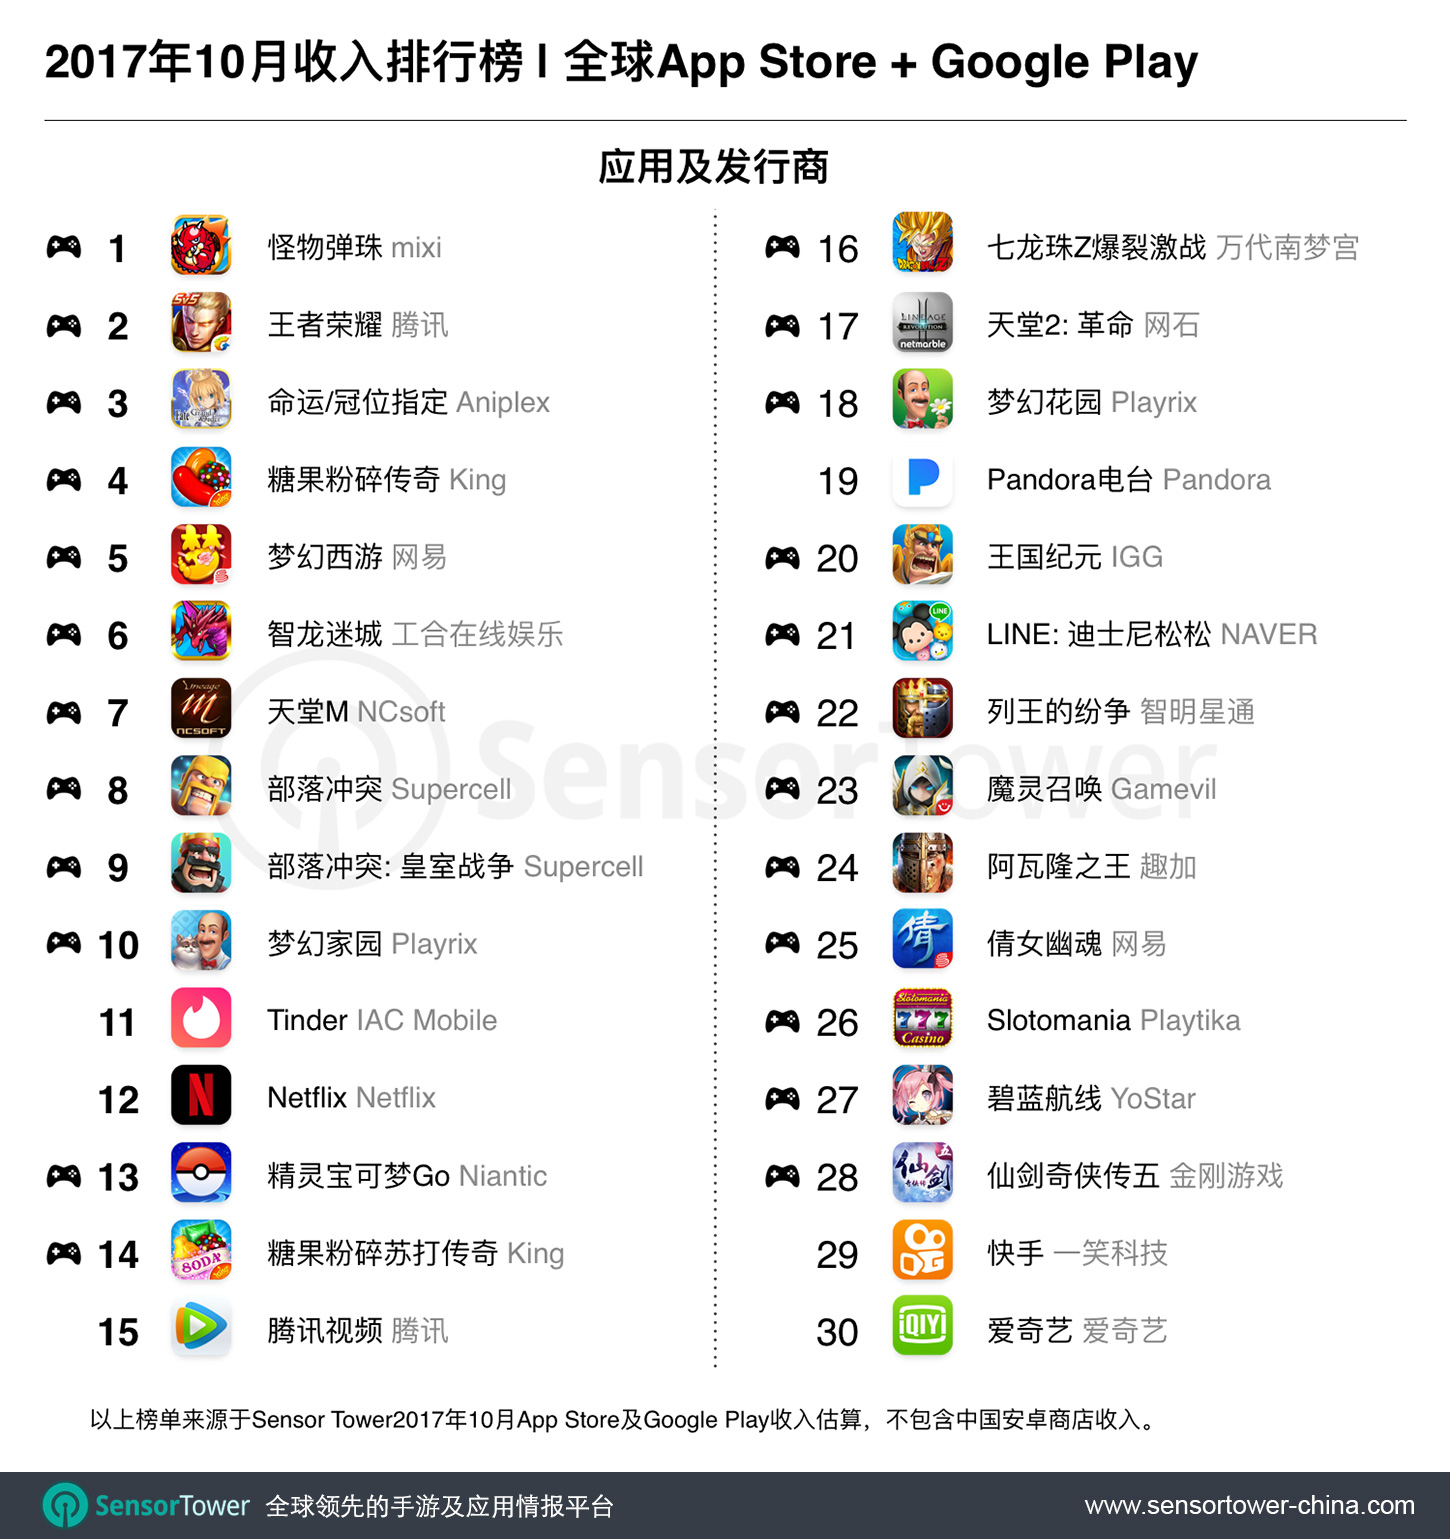 October 2017 Top 30 Apps by Unified Revenue Worldwide